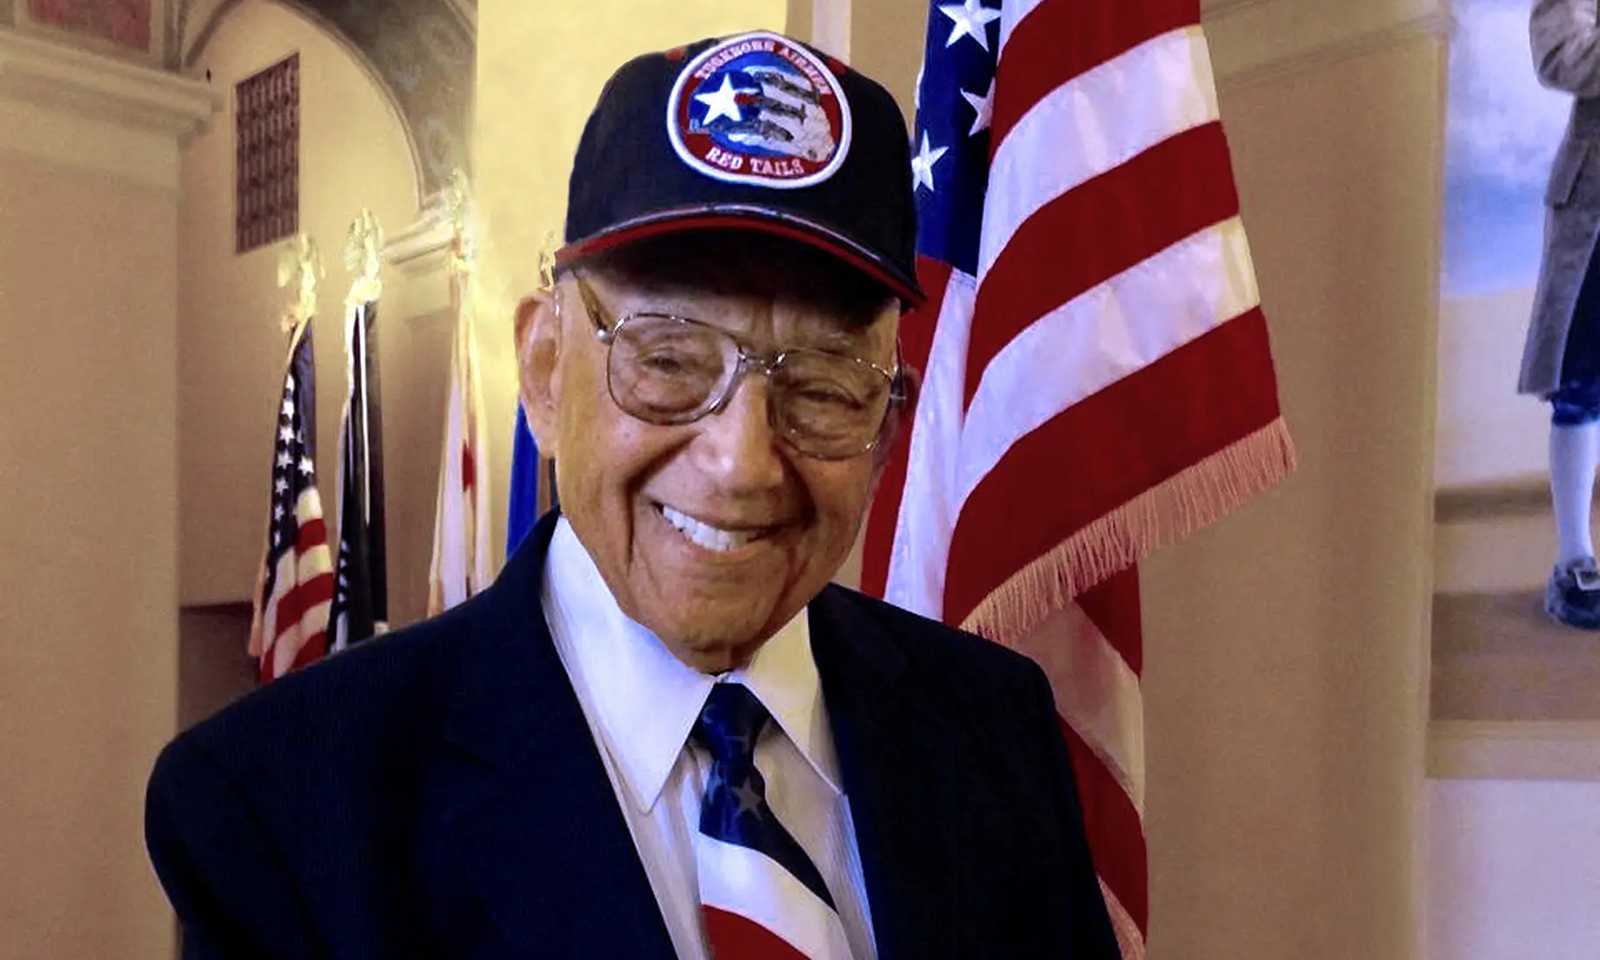 Tuskegee Airman’s name lives on